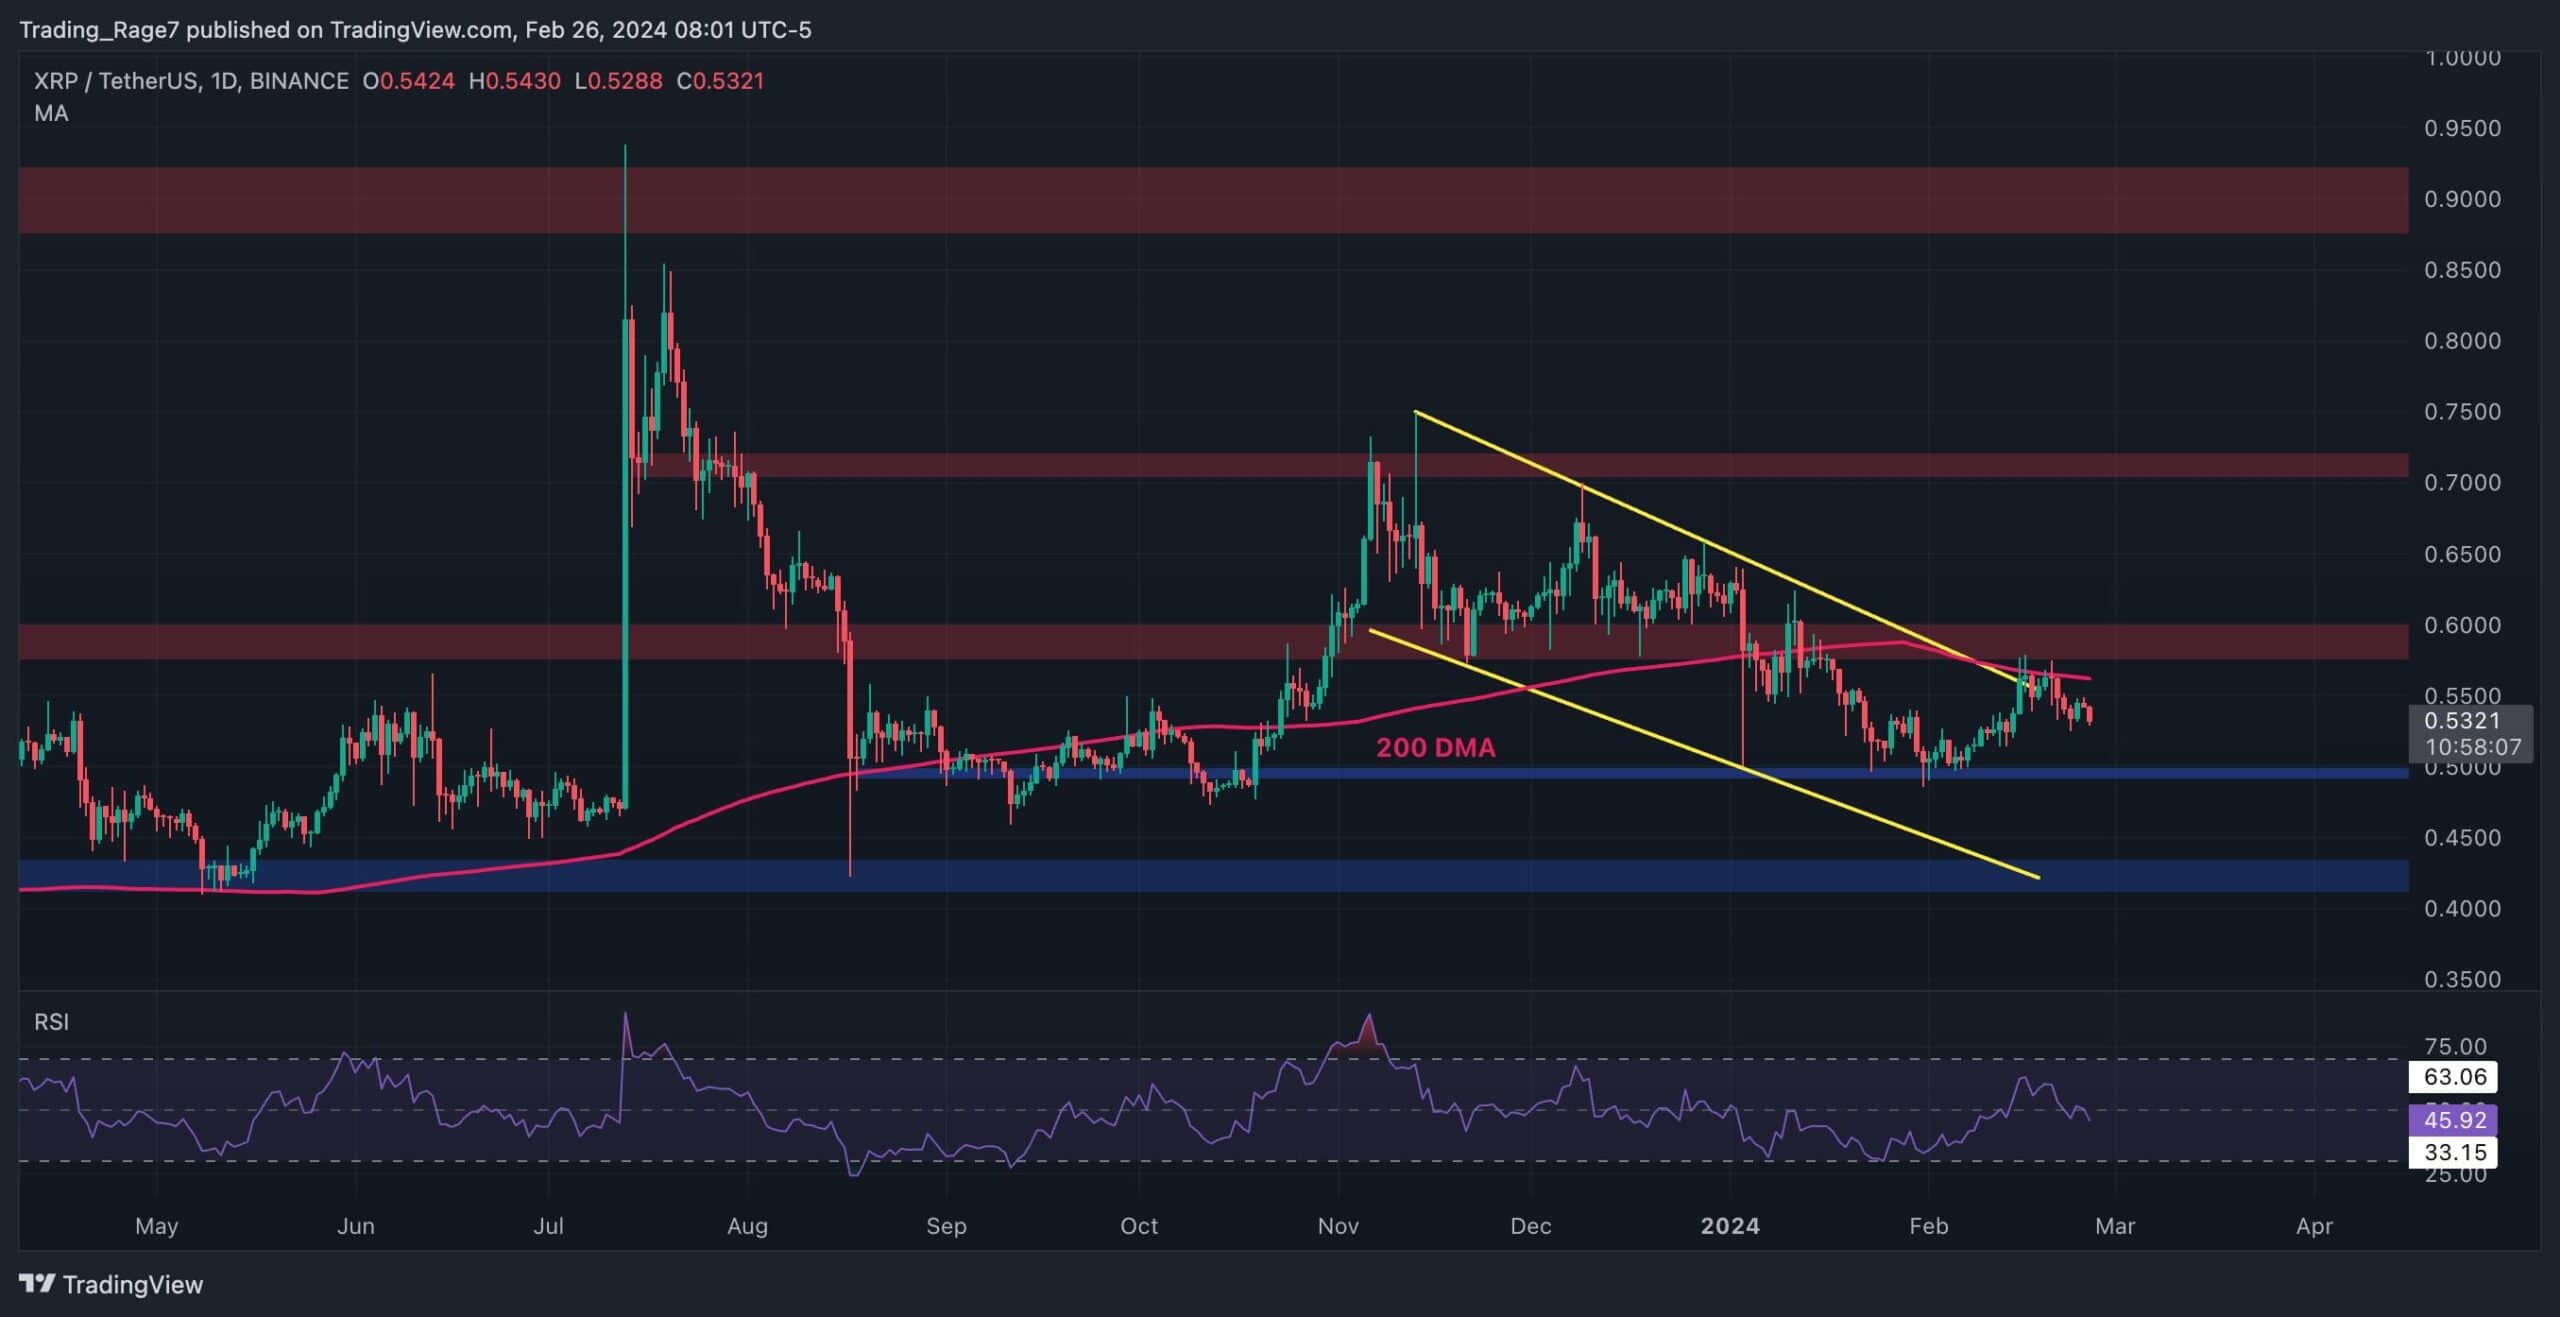 Ripple Seems Primed for a Drop to $0.5, But Will the Bulls Retaliate? (XRP Price Analysis)